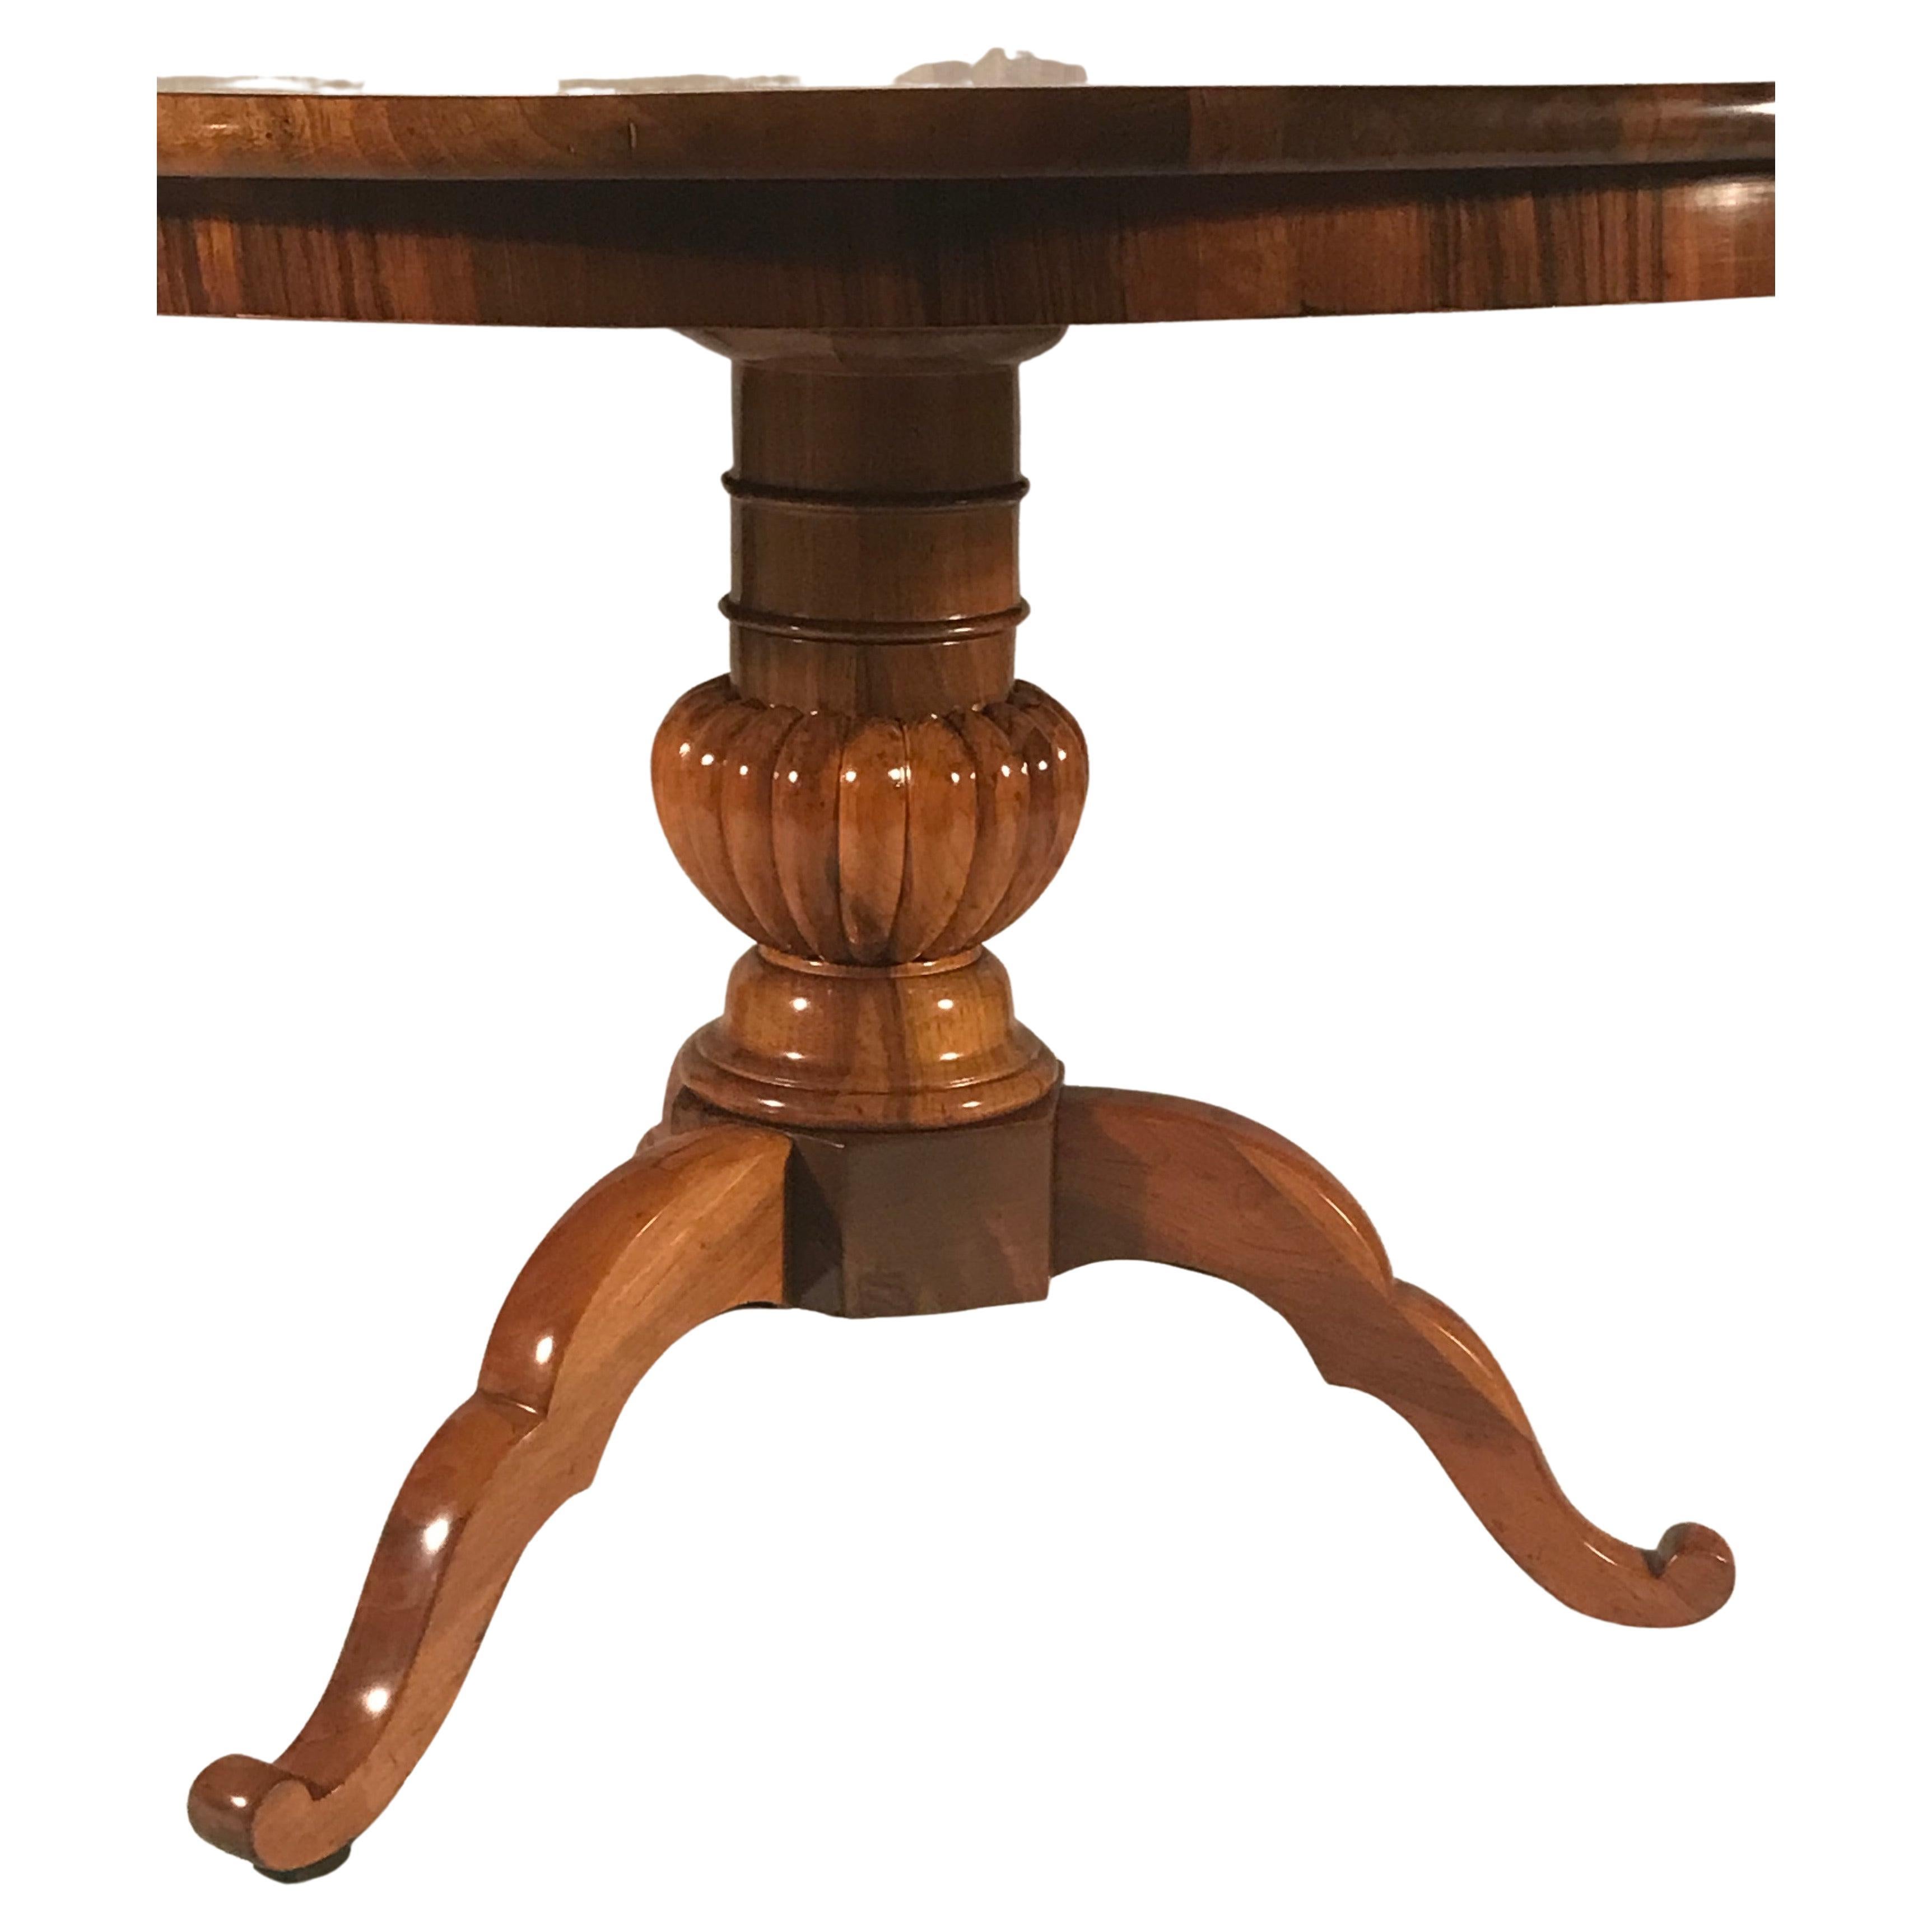 This unique Biedermeier table is truly a masterpiece. Its standout feature is the central column base, elegantly supported by a tripod foot. The craftsmanship and attention to detail are evident in every aspect of this table.

The top of the table